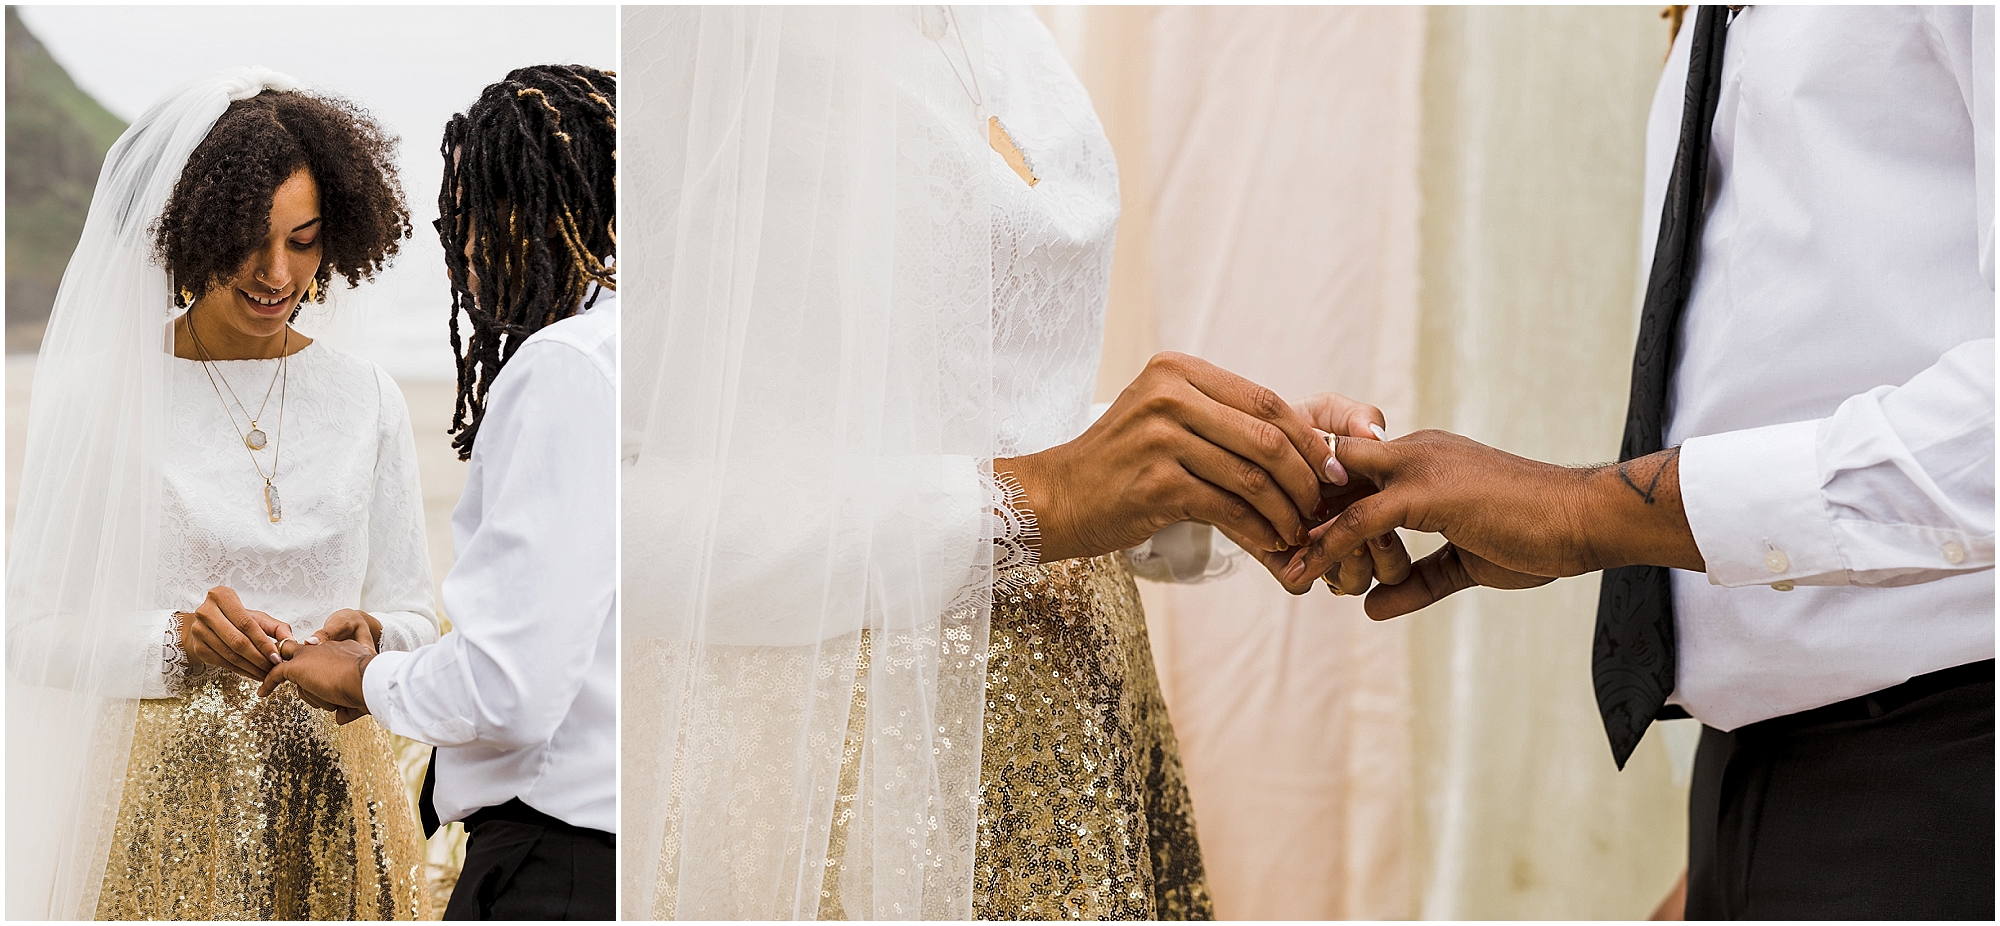 A bride wearing a white top and gold sequined skirt places the ring on her groom's finger during their intimate Oregon Coast elopement near Lincoln City. | Erica Swantek Photography